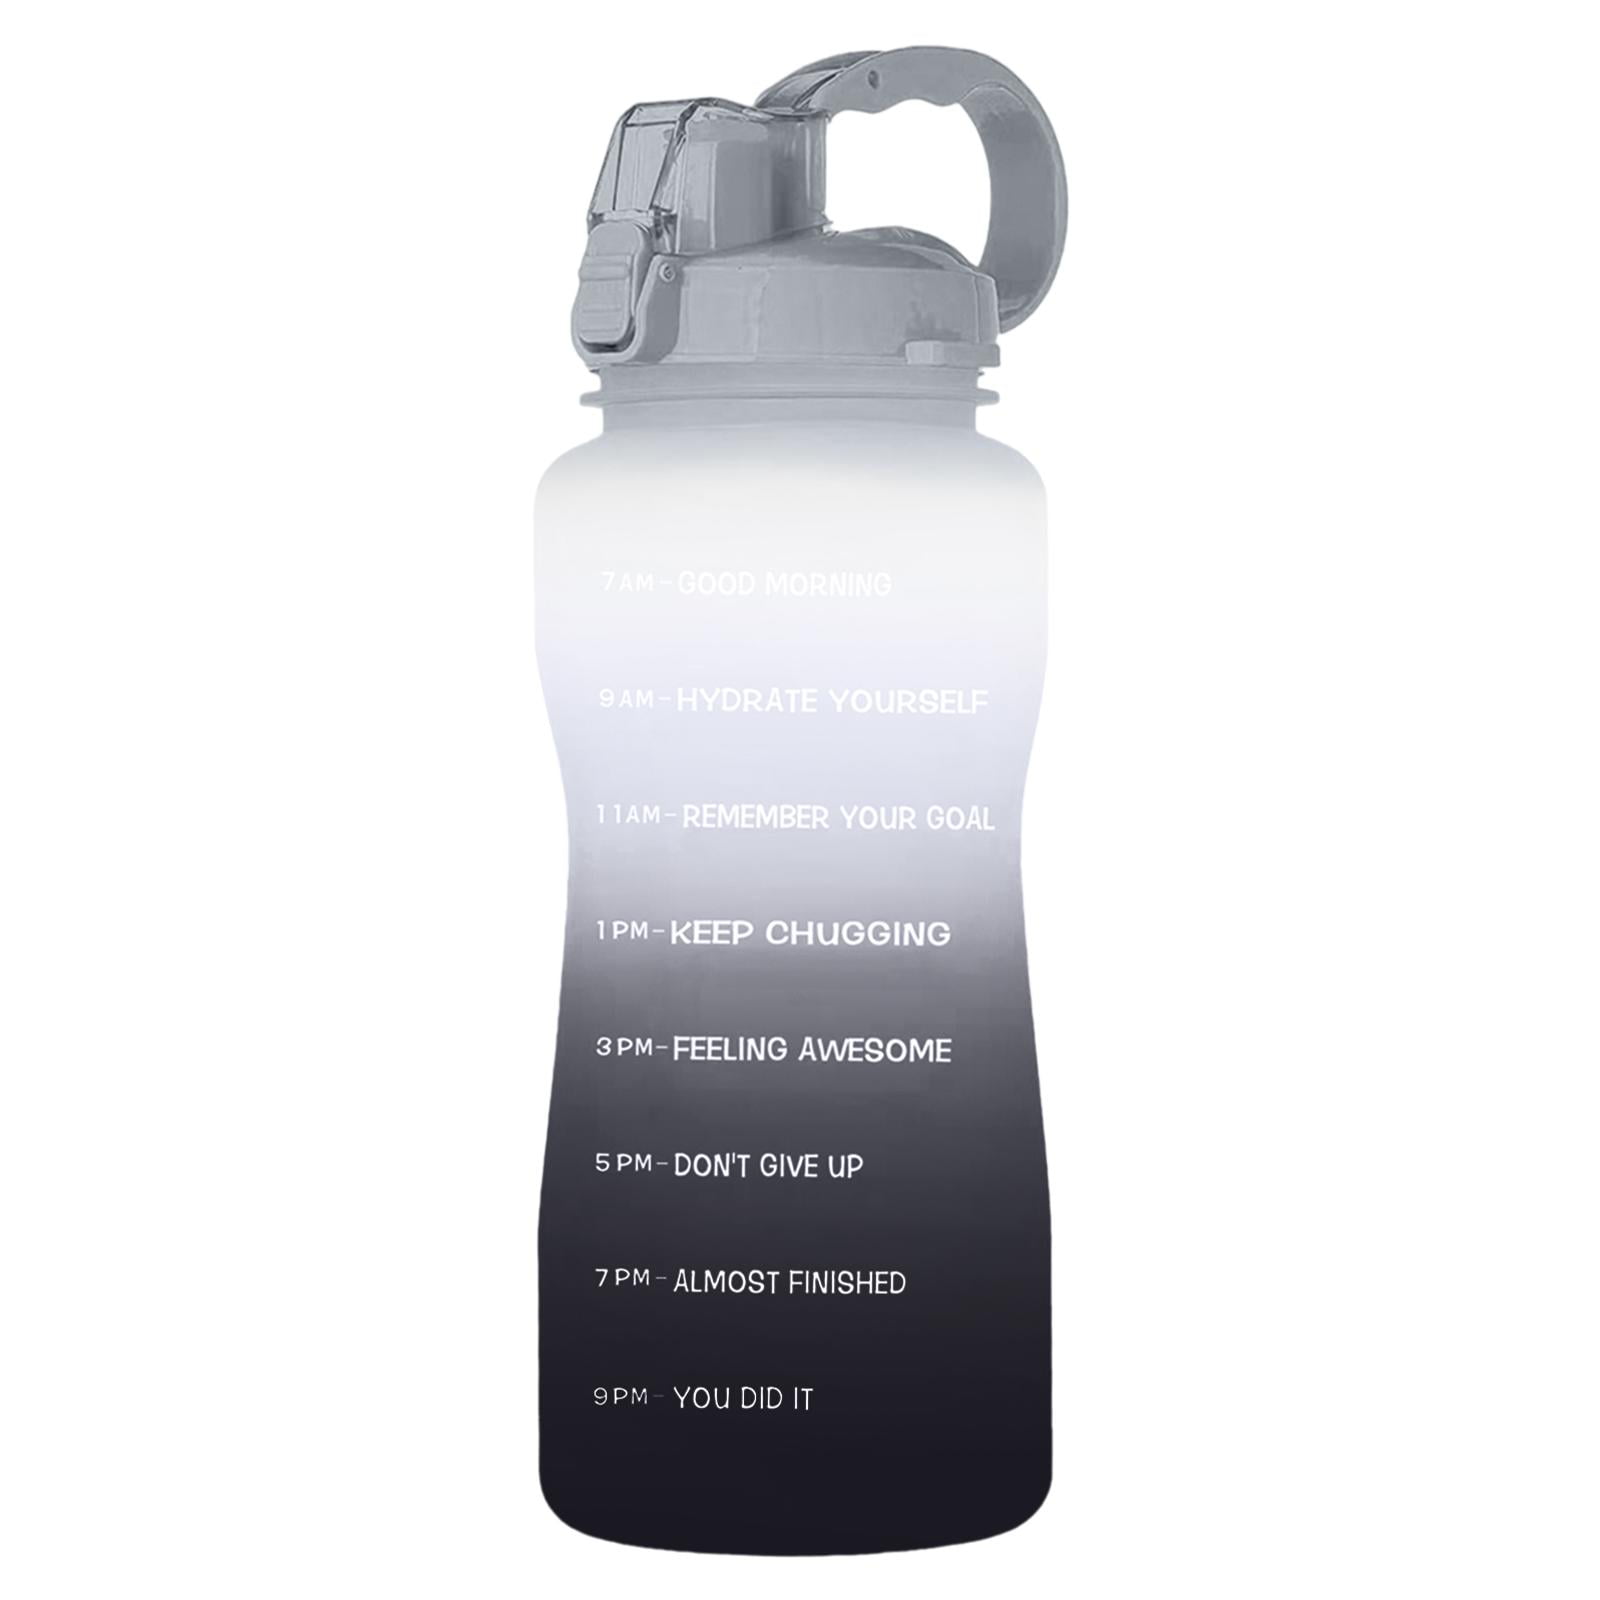 Details about   Reflex Large Water Bottle Jug 2.2 Litres Great for the Gym or Camping etc 